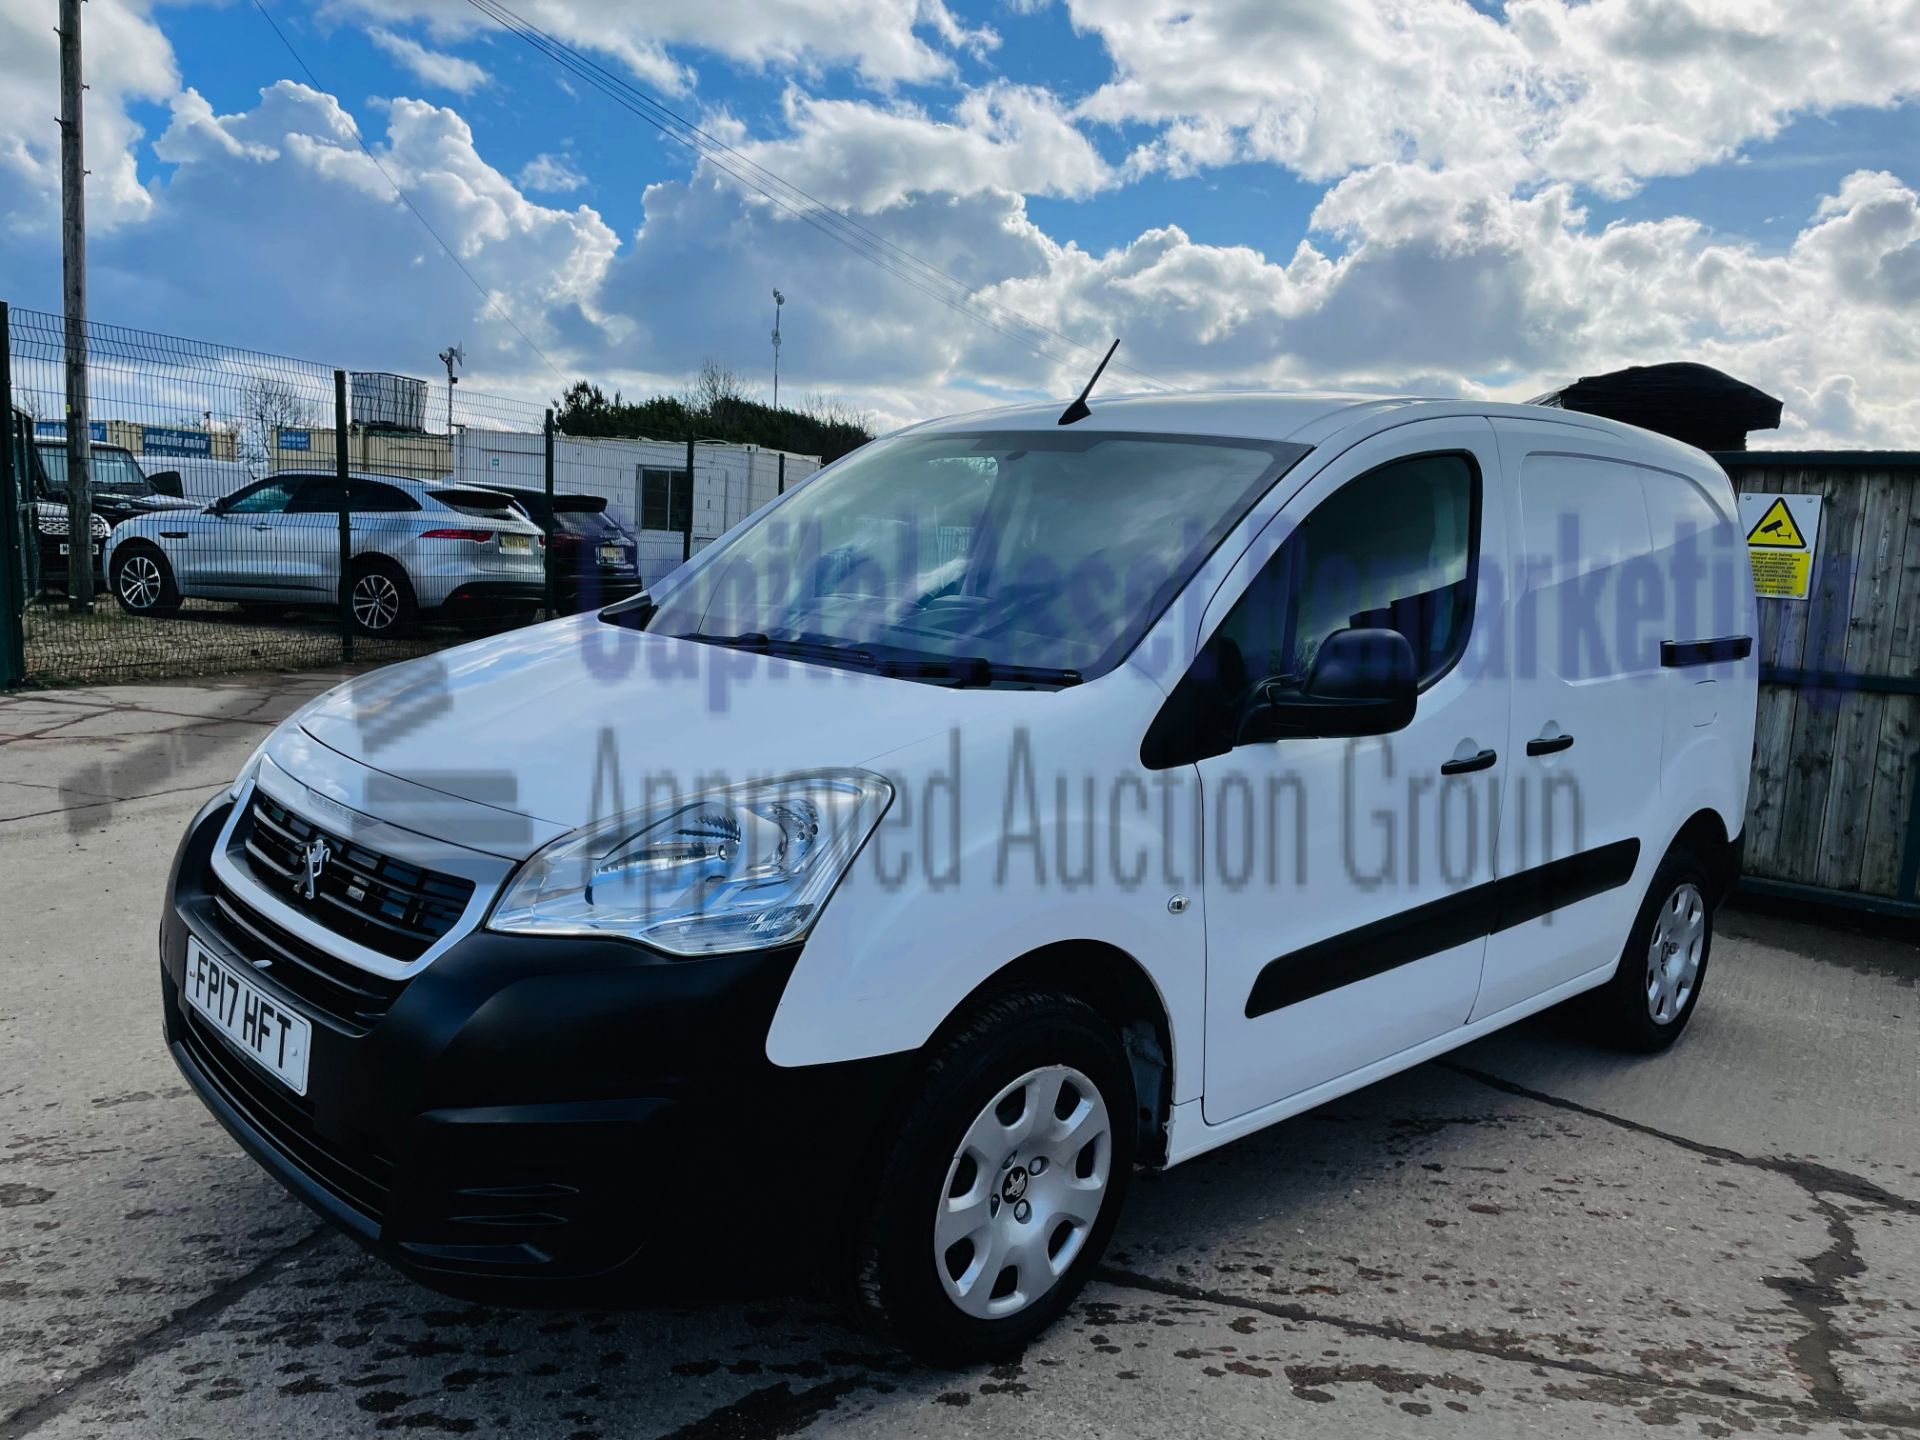 PEUGEOT PARTNER *PROFESSIONAL* PANEL VAN (2017 - EURO 6) '1.6 BLUE HDI' *AIR CON & CRUISE* (1 OWNER) - Image 6 of 34